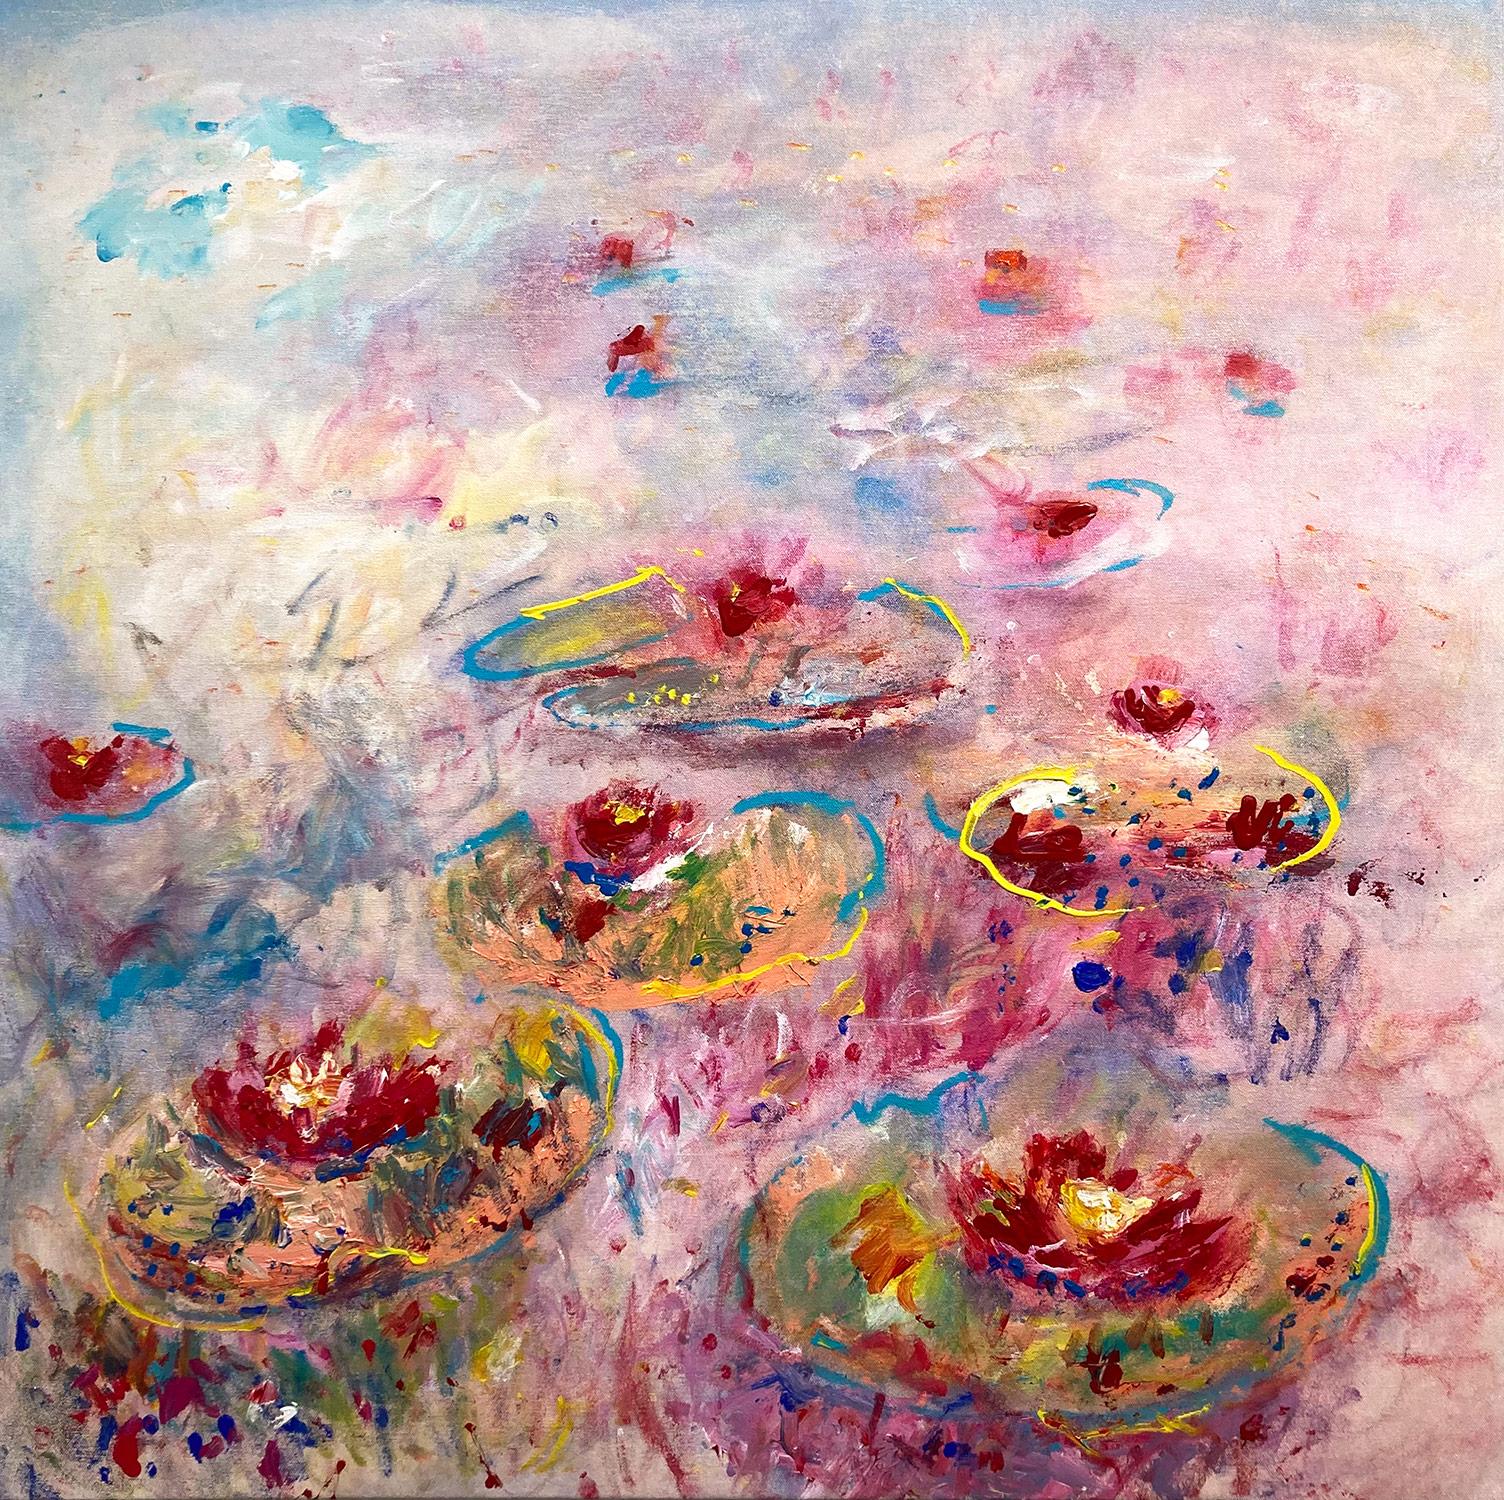 Robert Gregory Phillips Abstract Painting - "Lilly Pads on the Water" Contemporary Acrylic Painting In the Style of Monet  